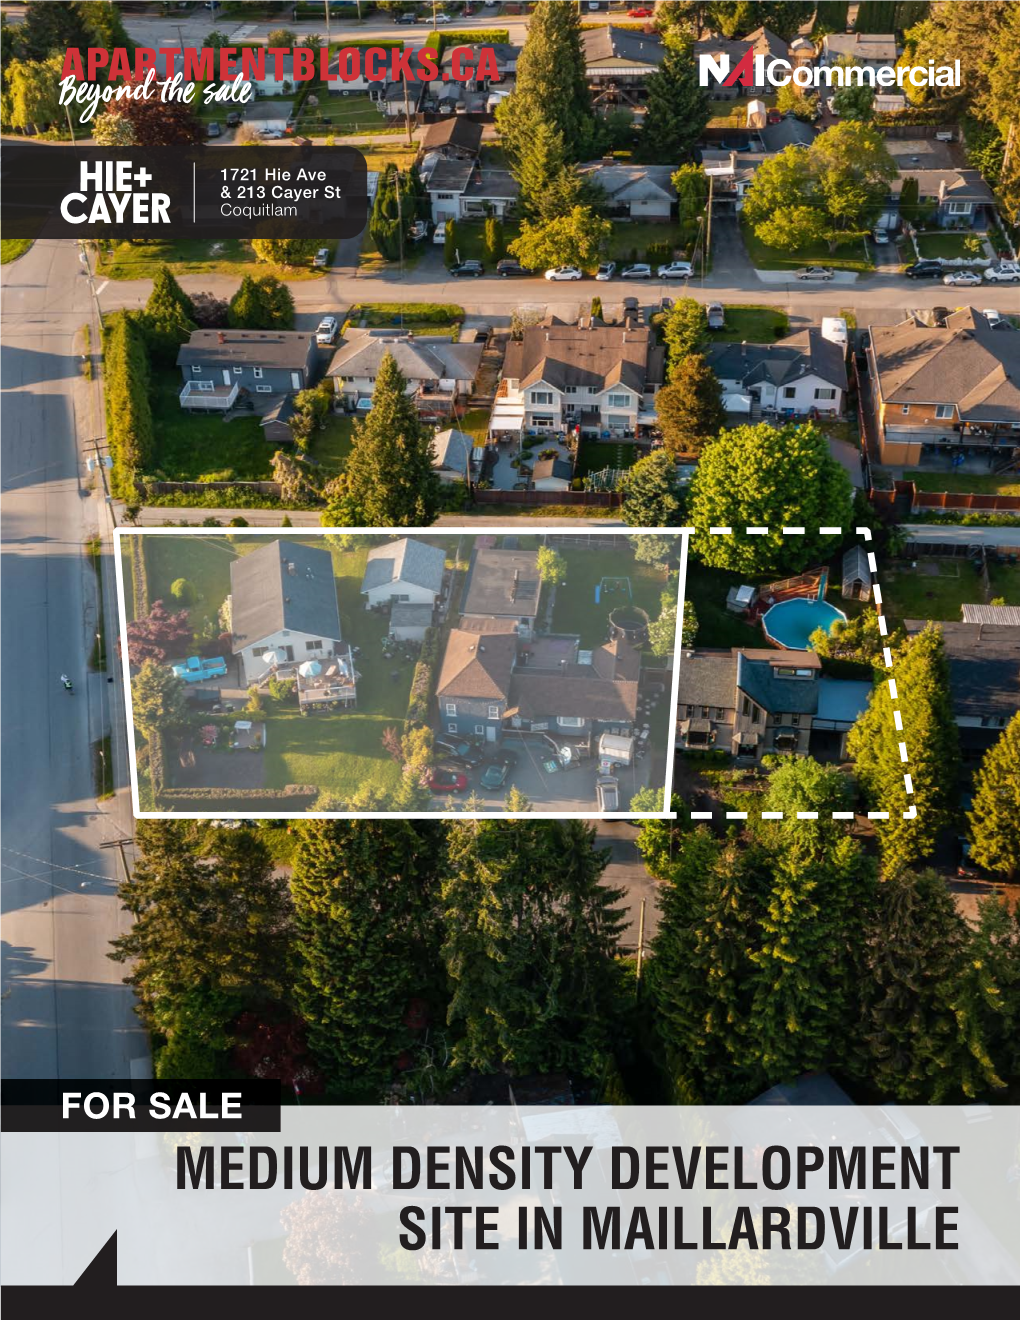 MEDIUM DENSITY DEVELOPMENT SITE in MAILLARDVILLE SURREY NEW WESTMINSTER the Potential Views from the 6Th Floor